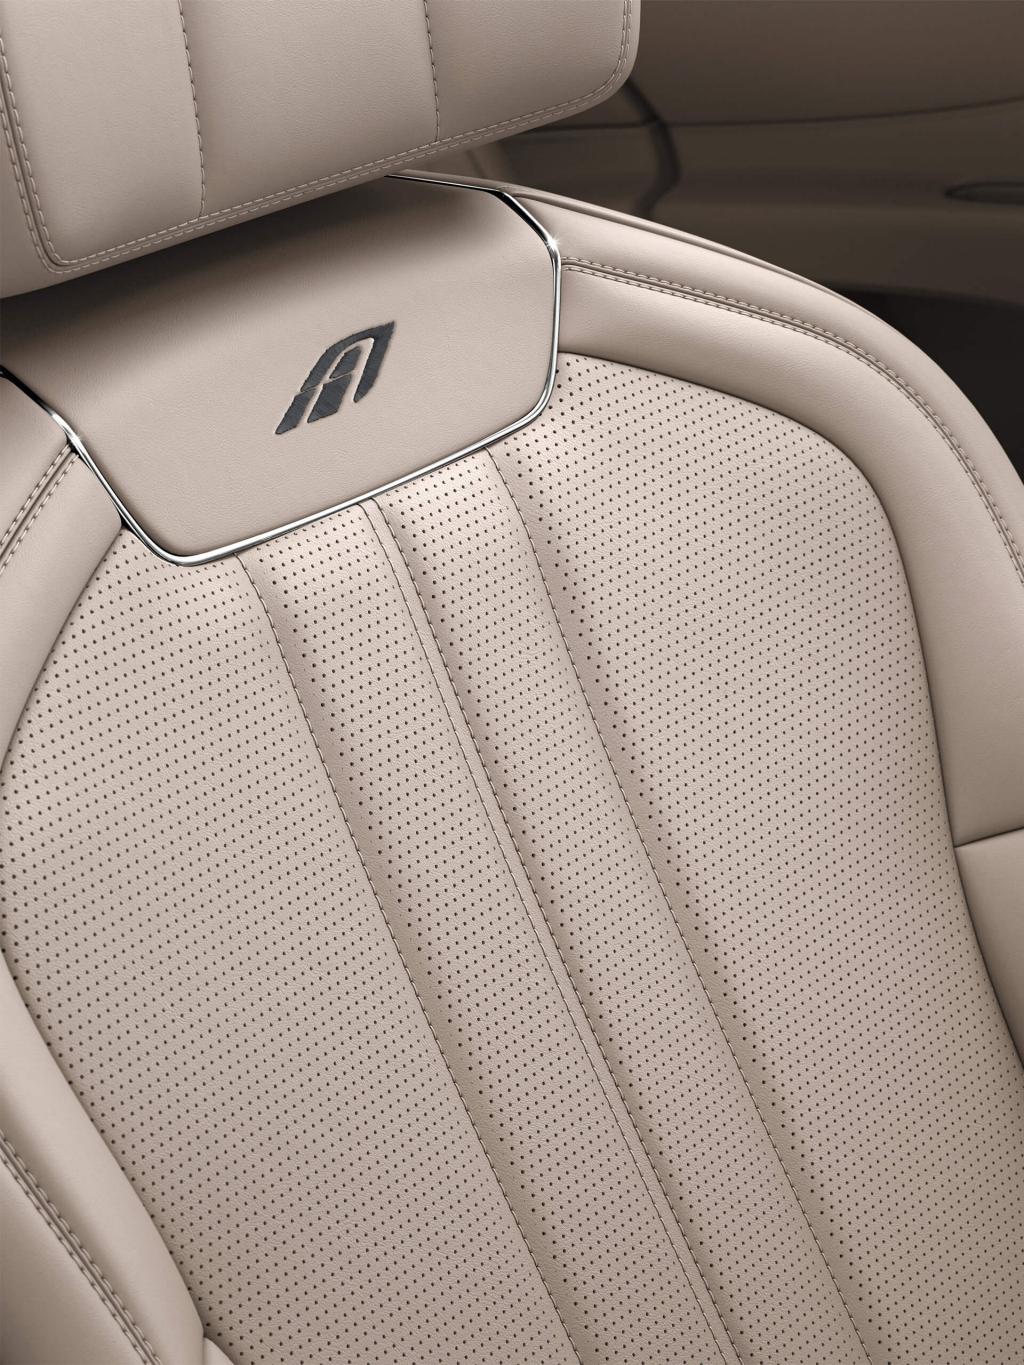 Bentley Flying Spur A V8 fluted leather seats featuring Contrast A Emblem Stitching in Portland Hide.